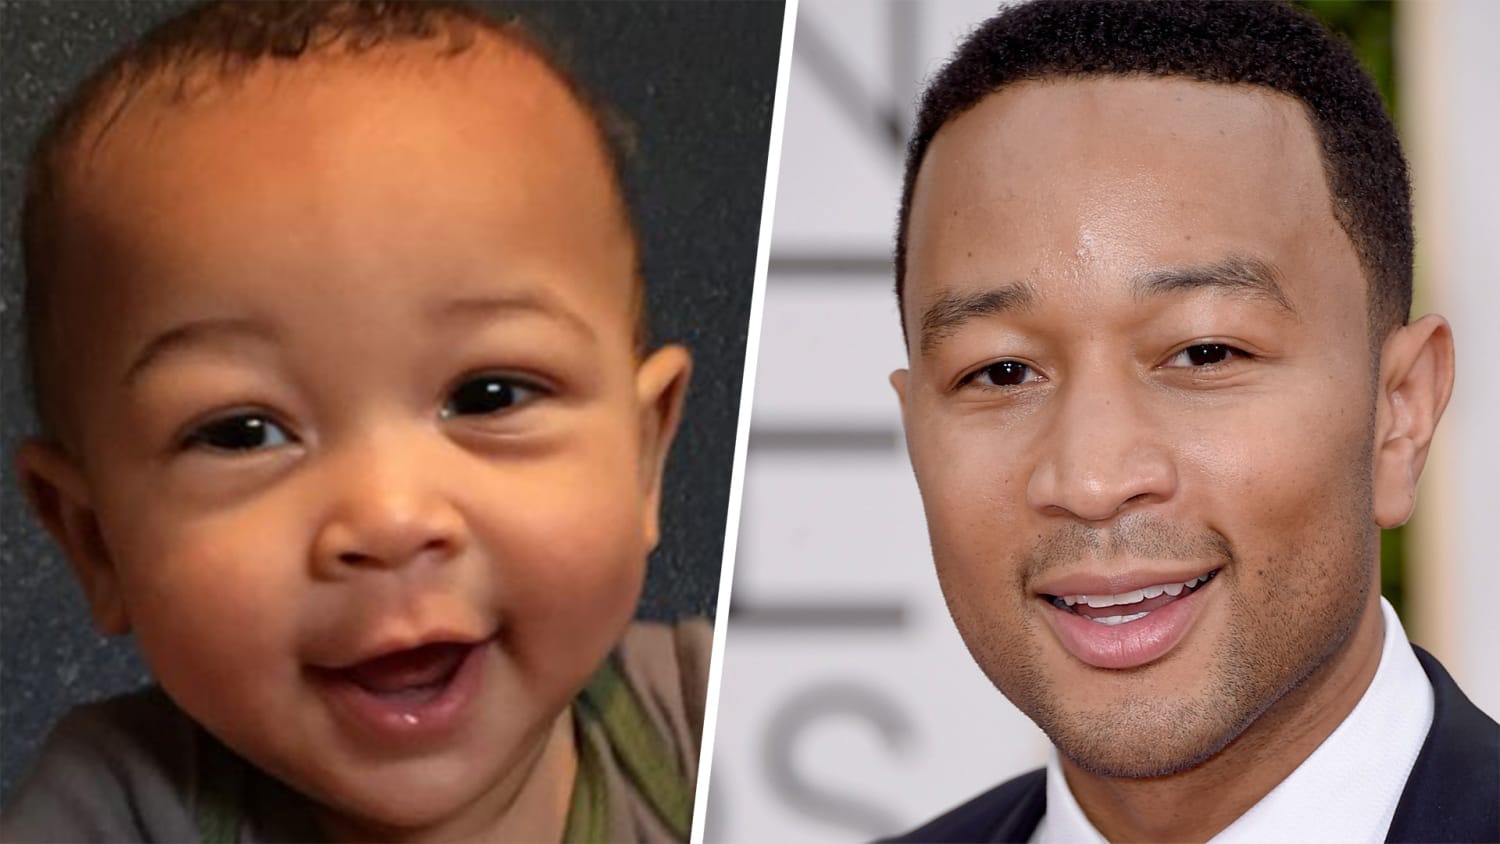 John Legend, Ed Sheeran and other stars with baby doppelgangers - TODAY.com